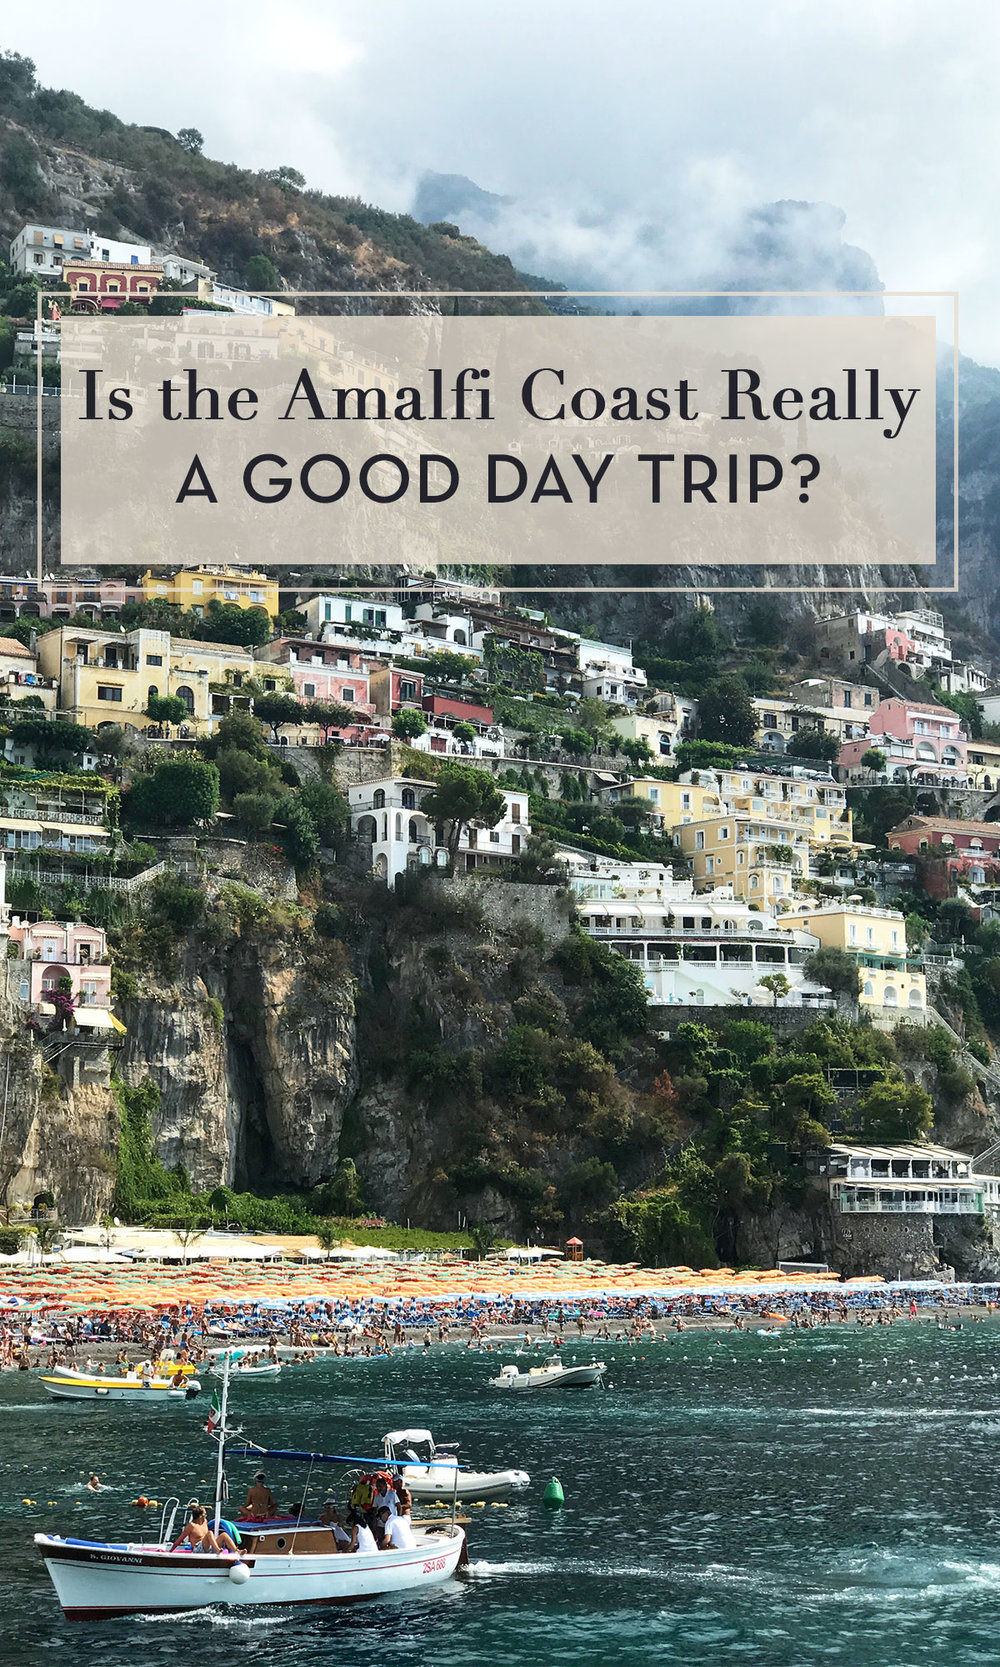 Should You Go to the Amalfi Coast for a Day Trip?